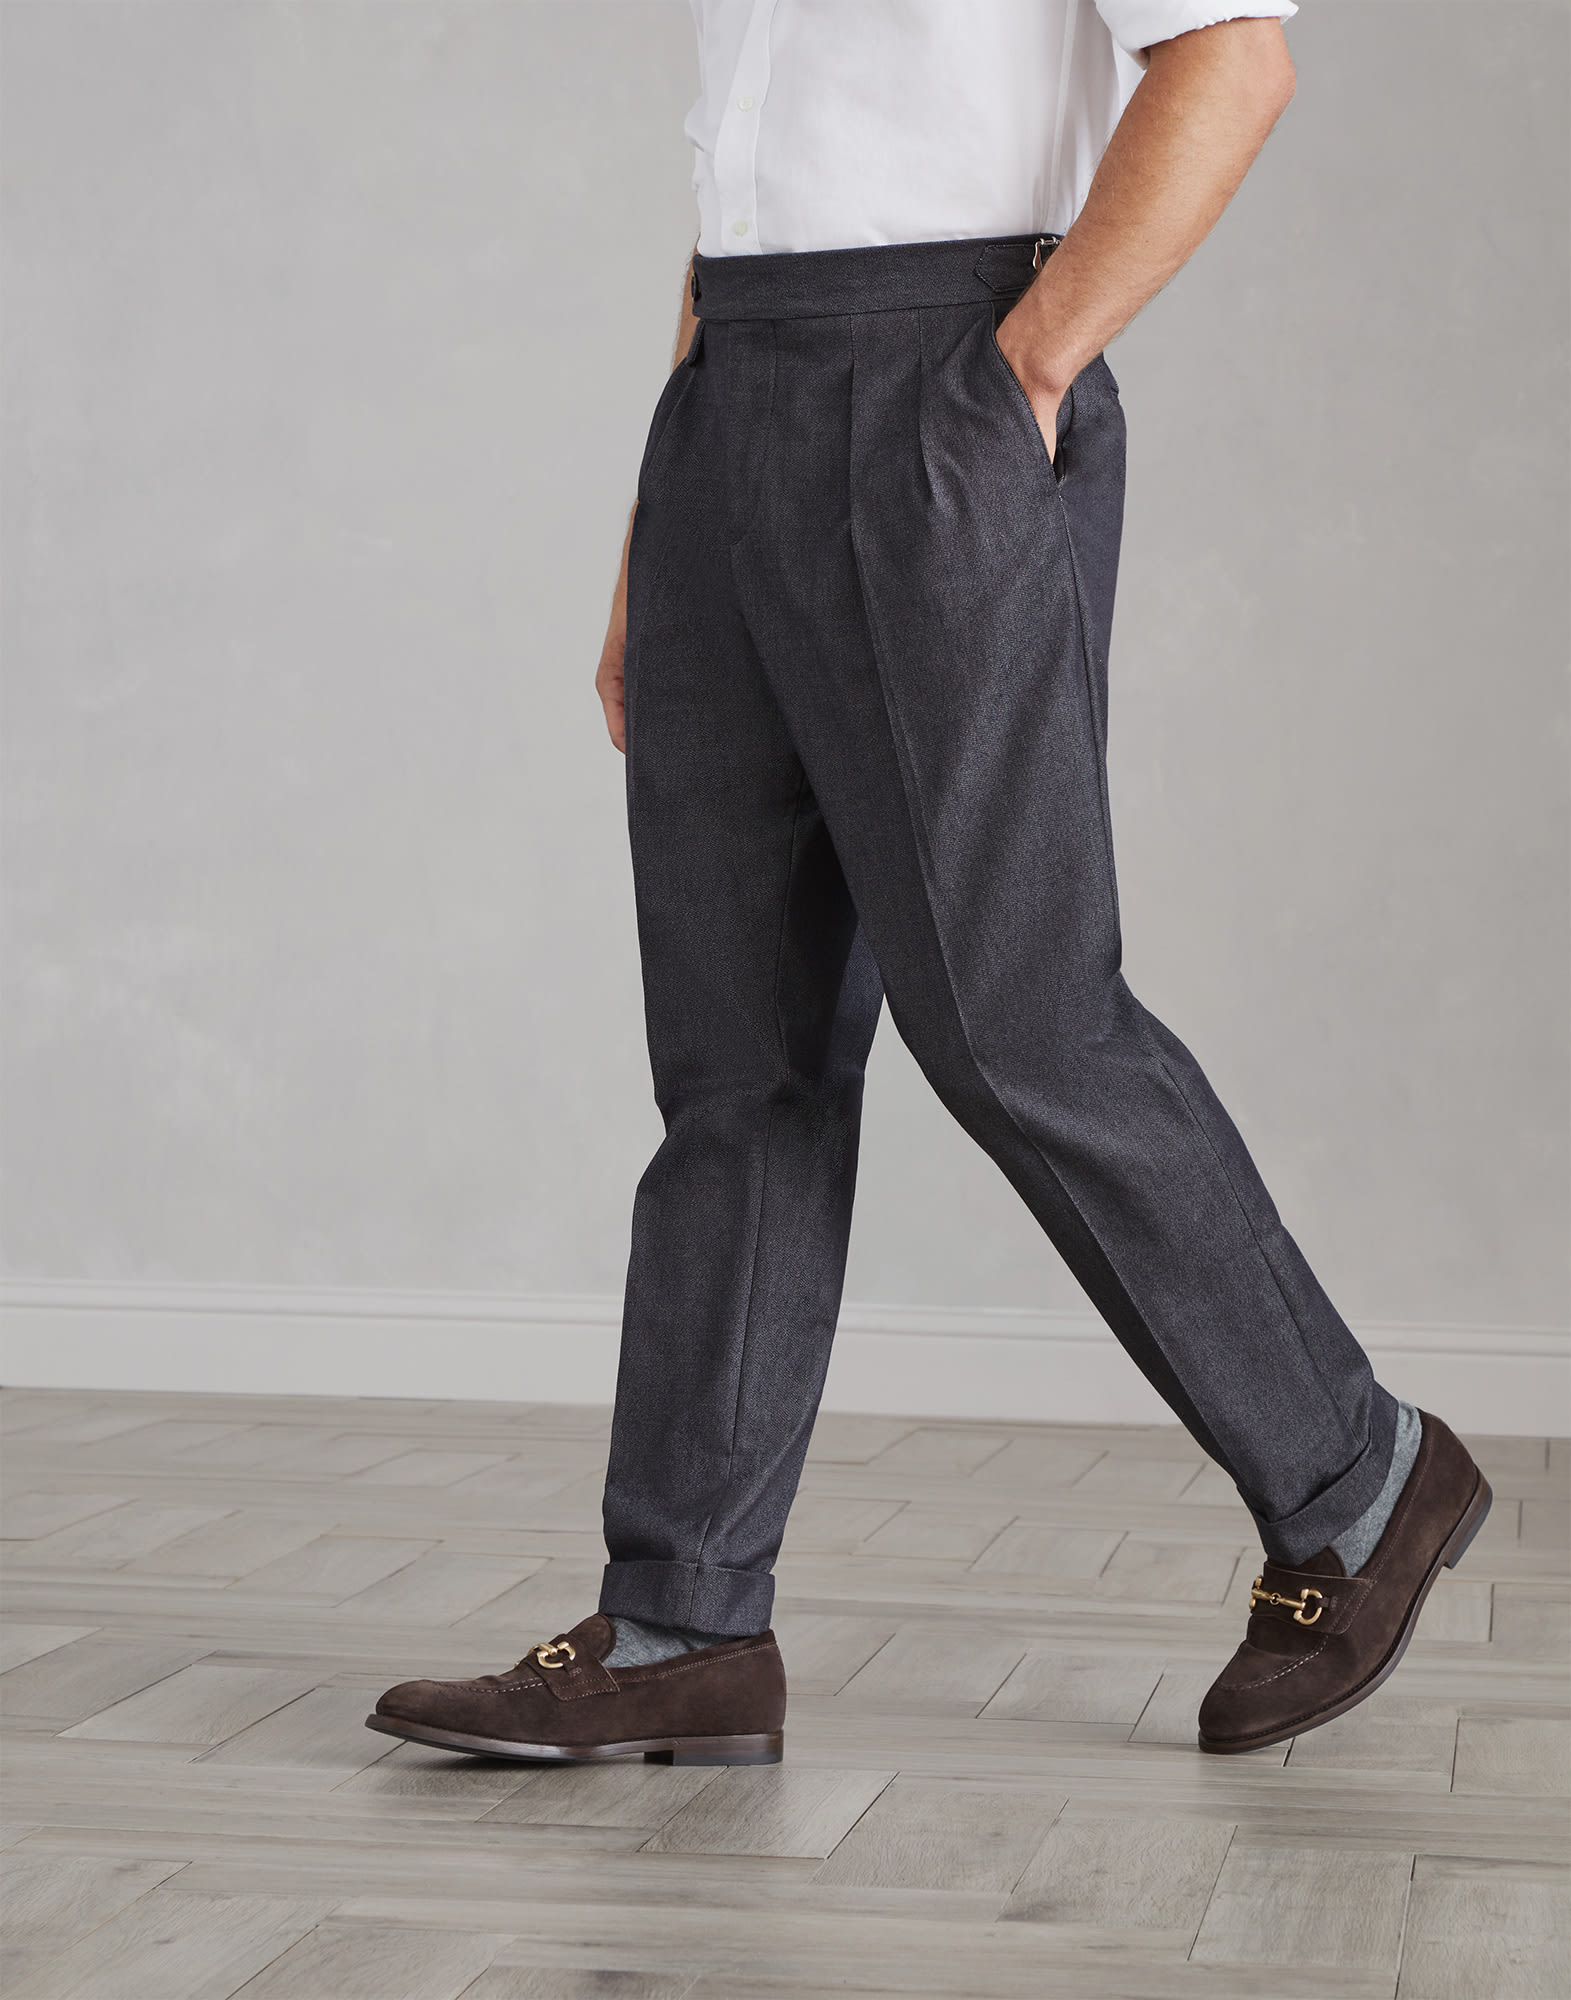 Tailor fit trousers